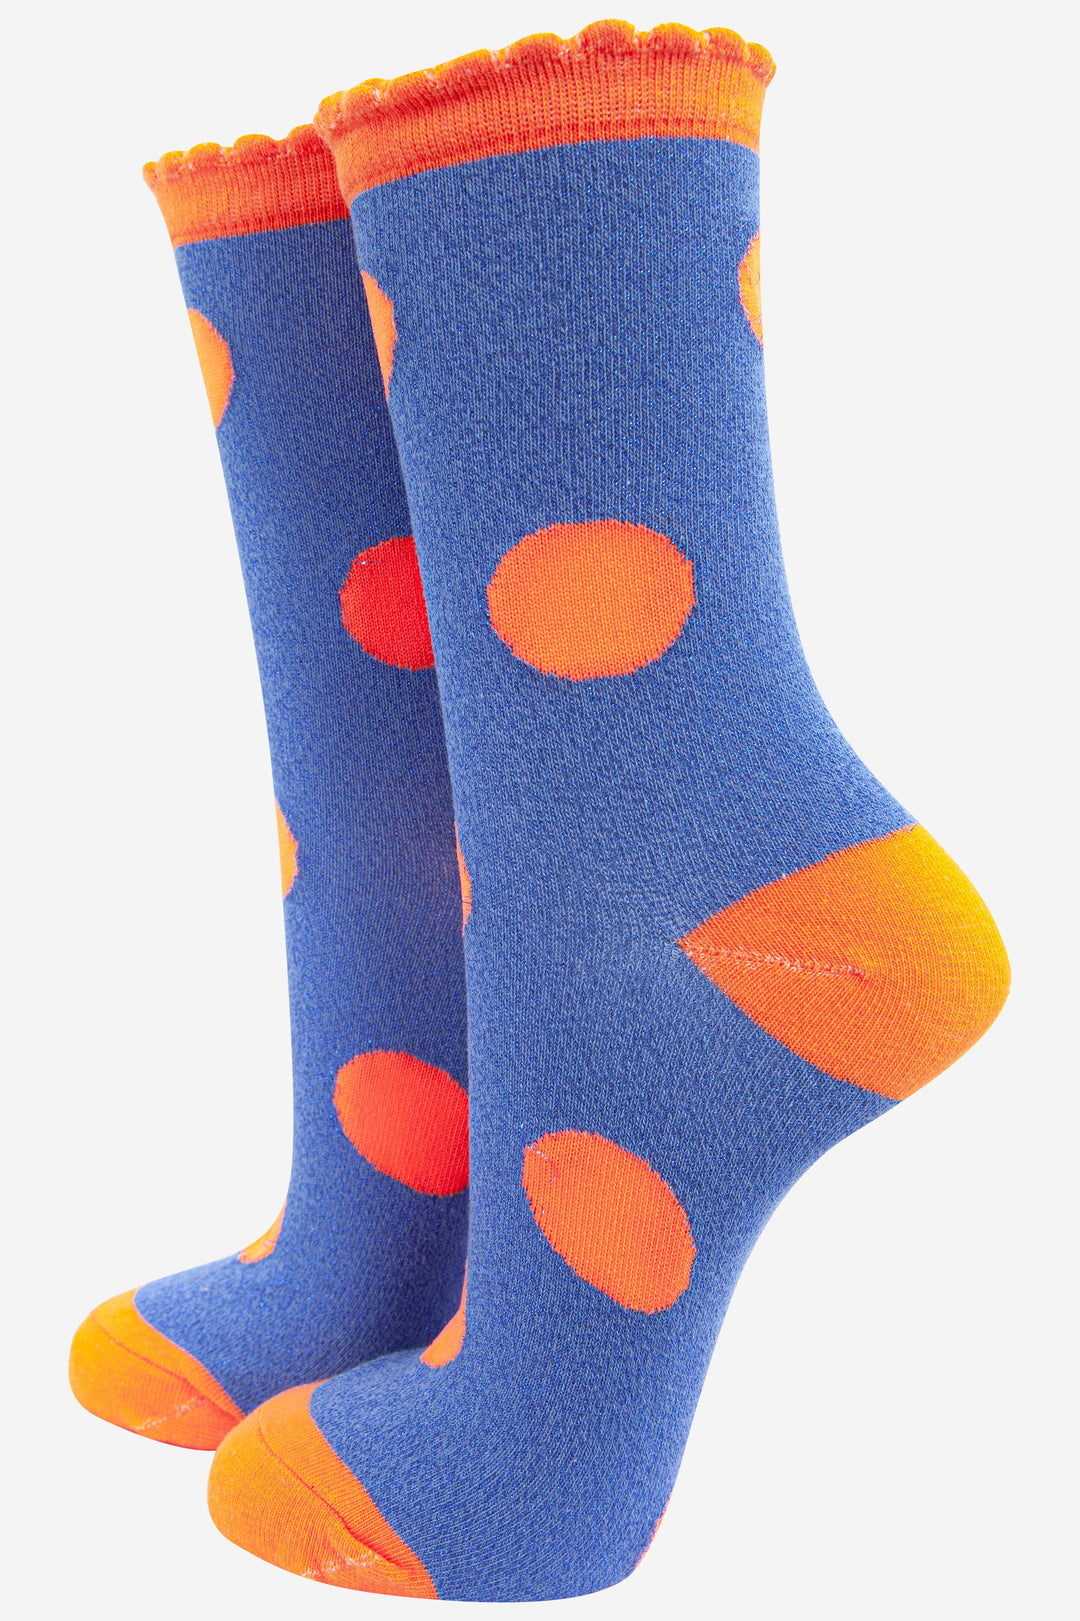 blue and orange polka dot sparkly glitter socks with a scalloped edge and all over shimmer